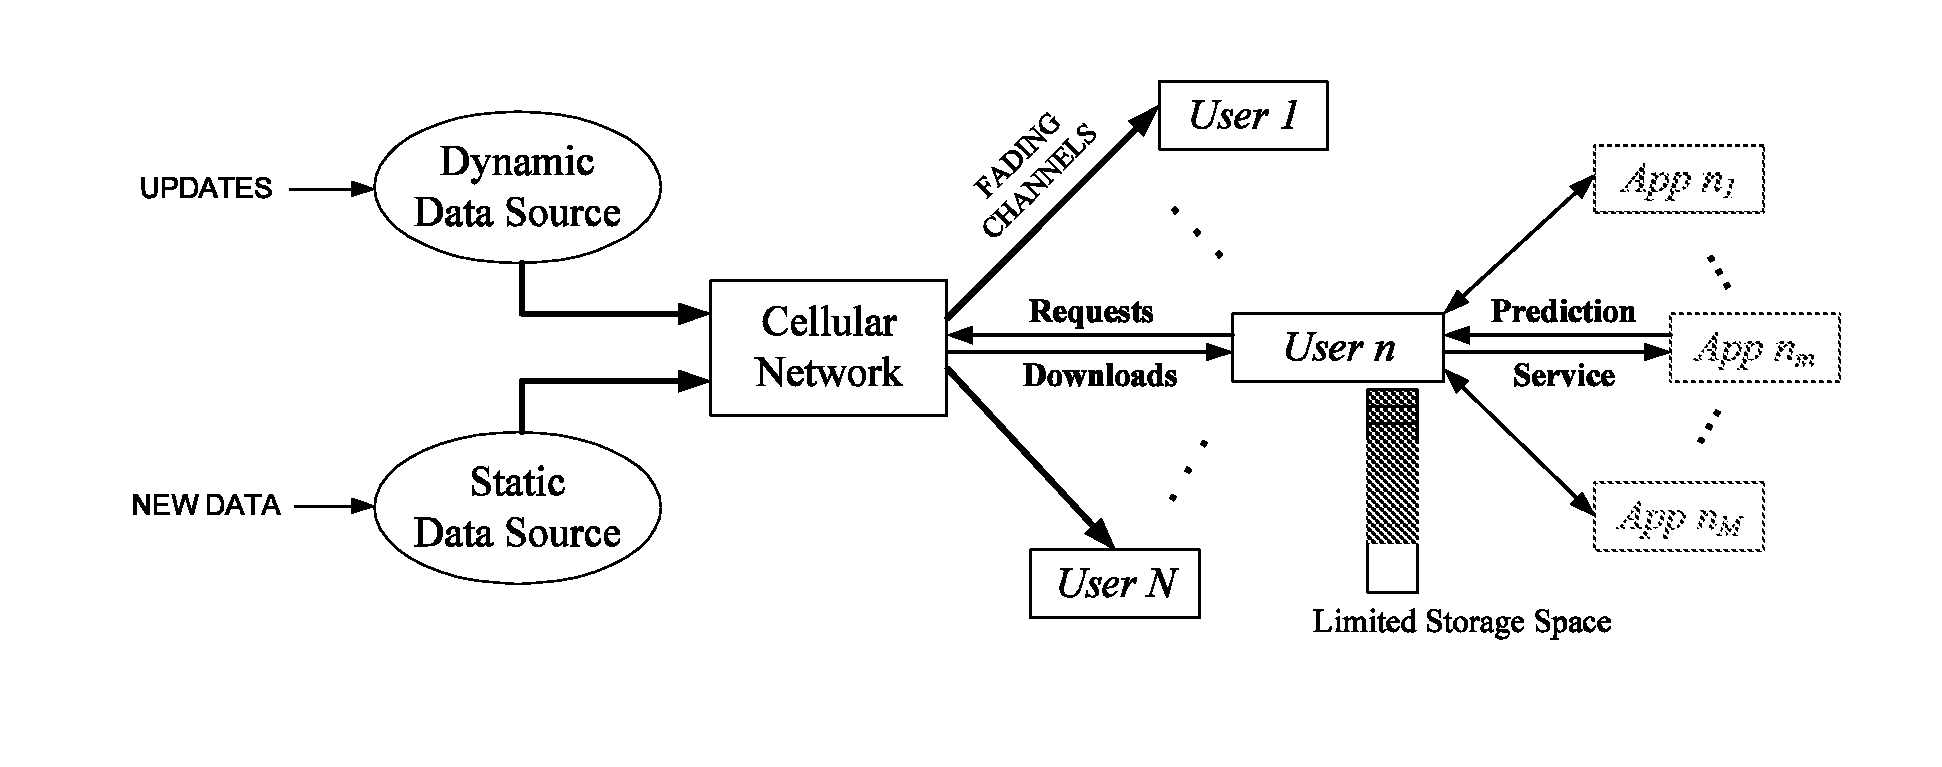 Predictive network system and method